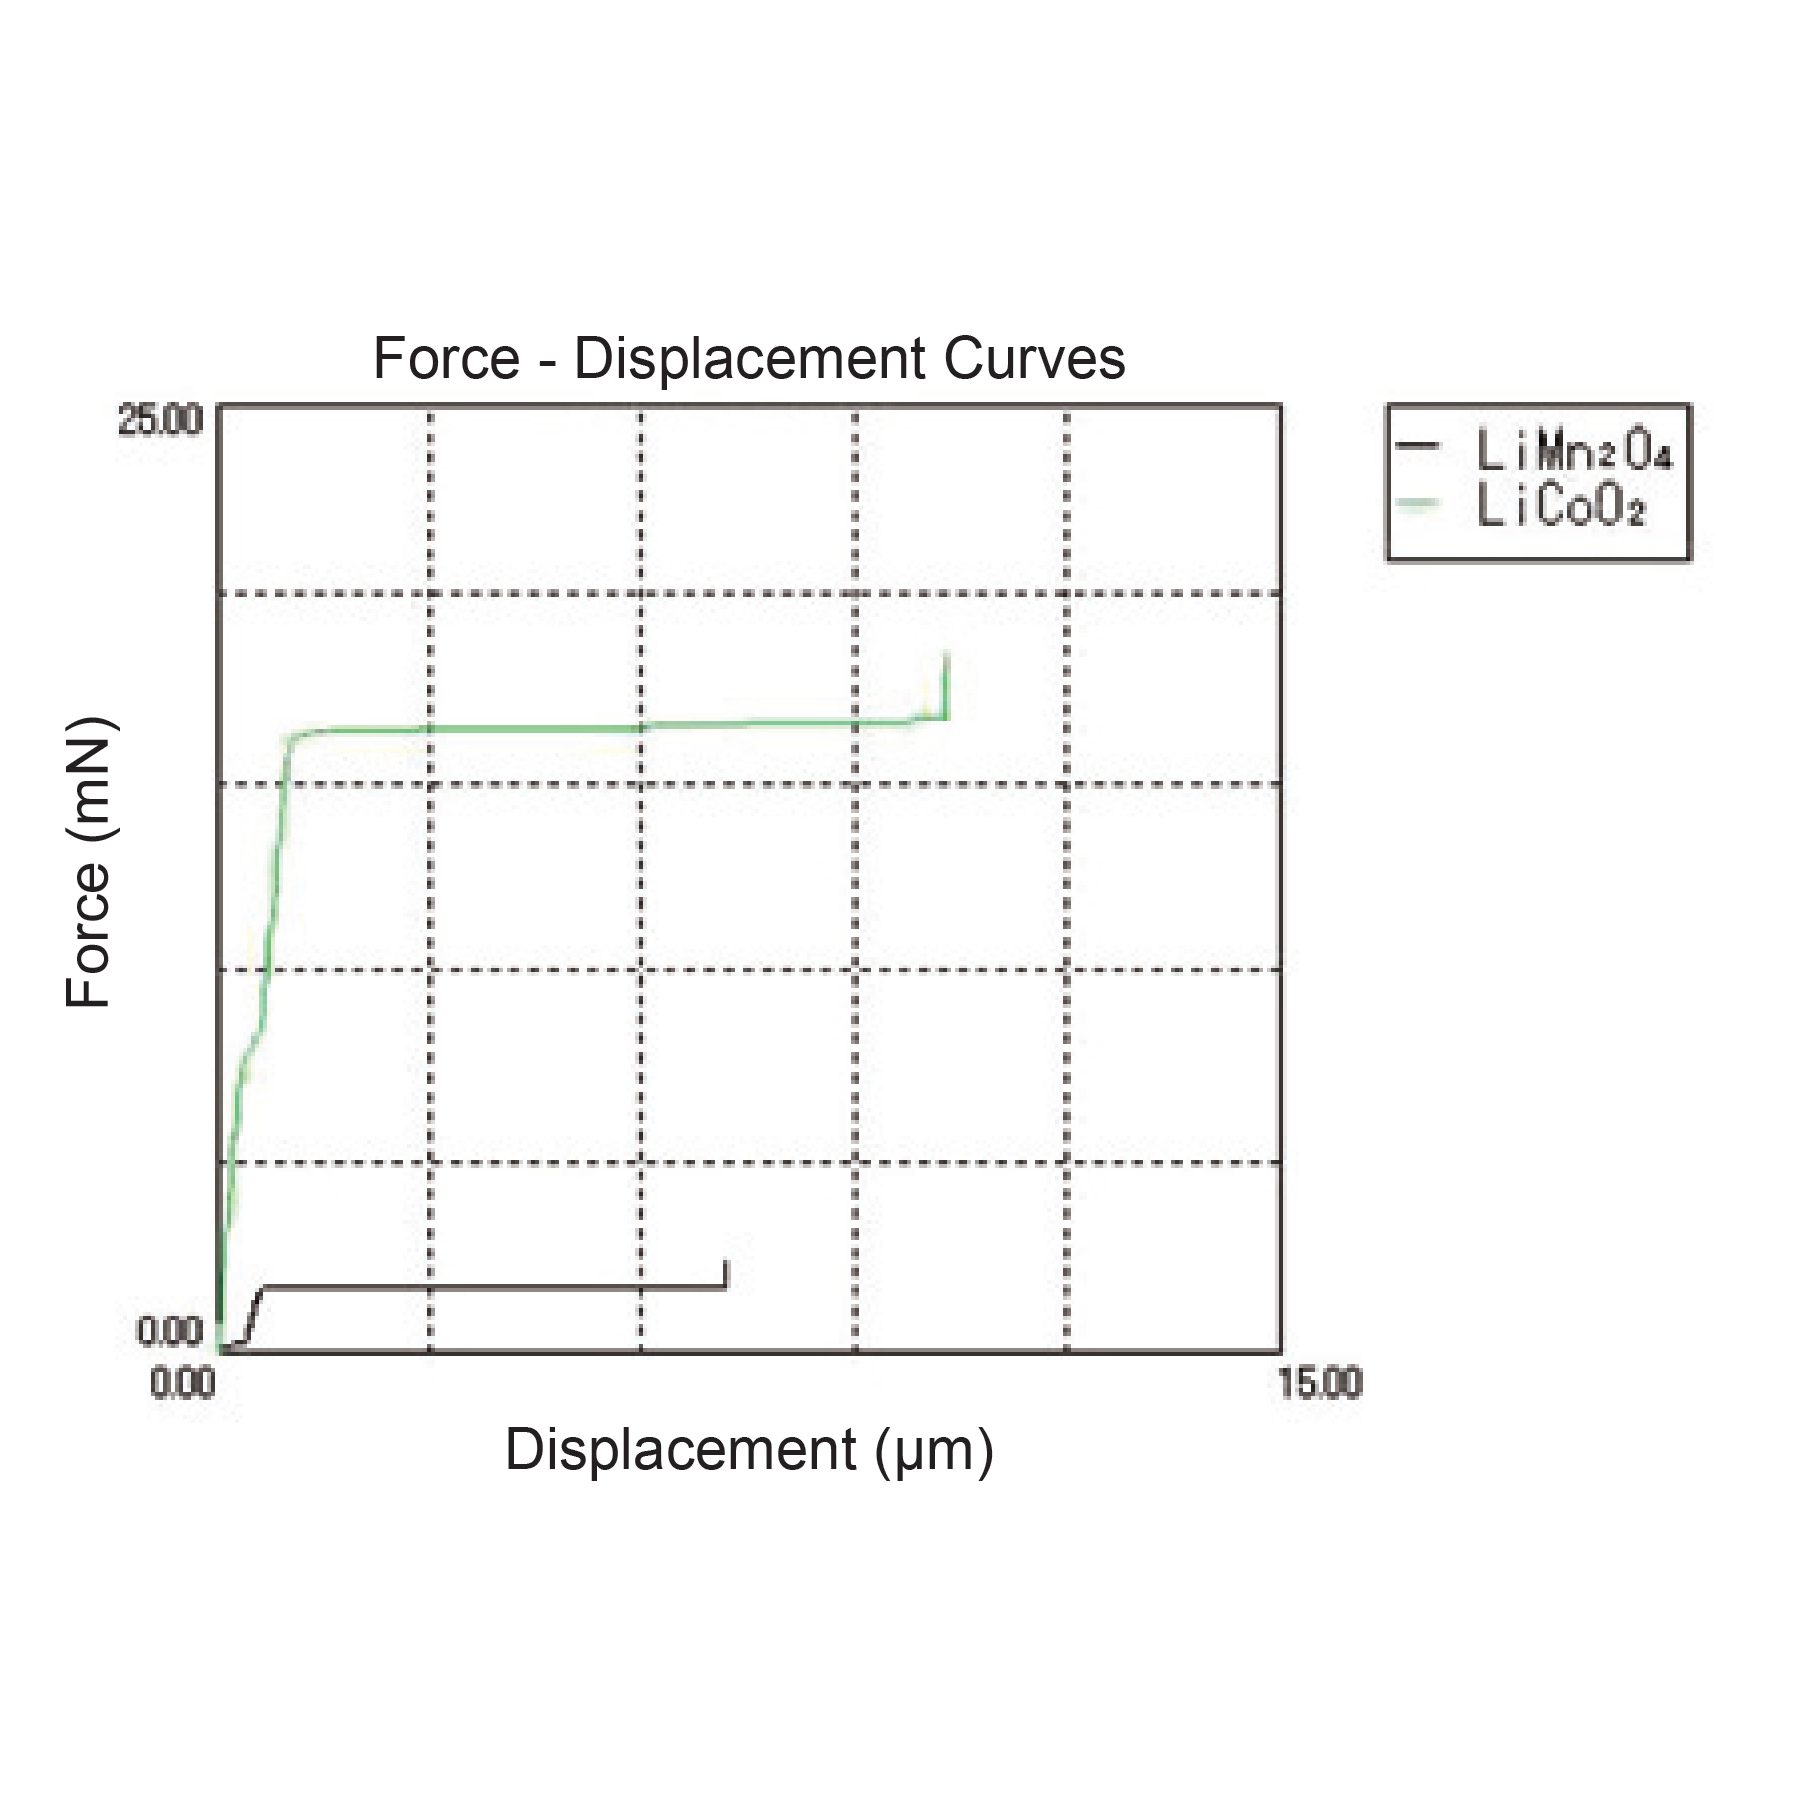 Figure 6: Average force-displacement curve comparing LiMn2O4 and LiCoO2 particle strength